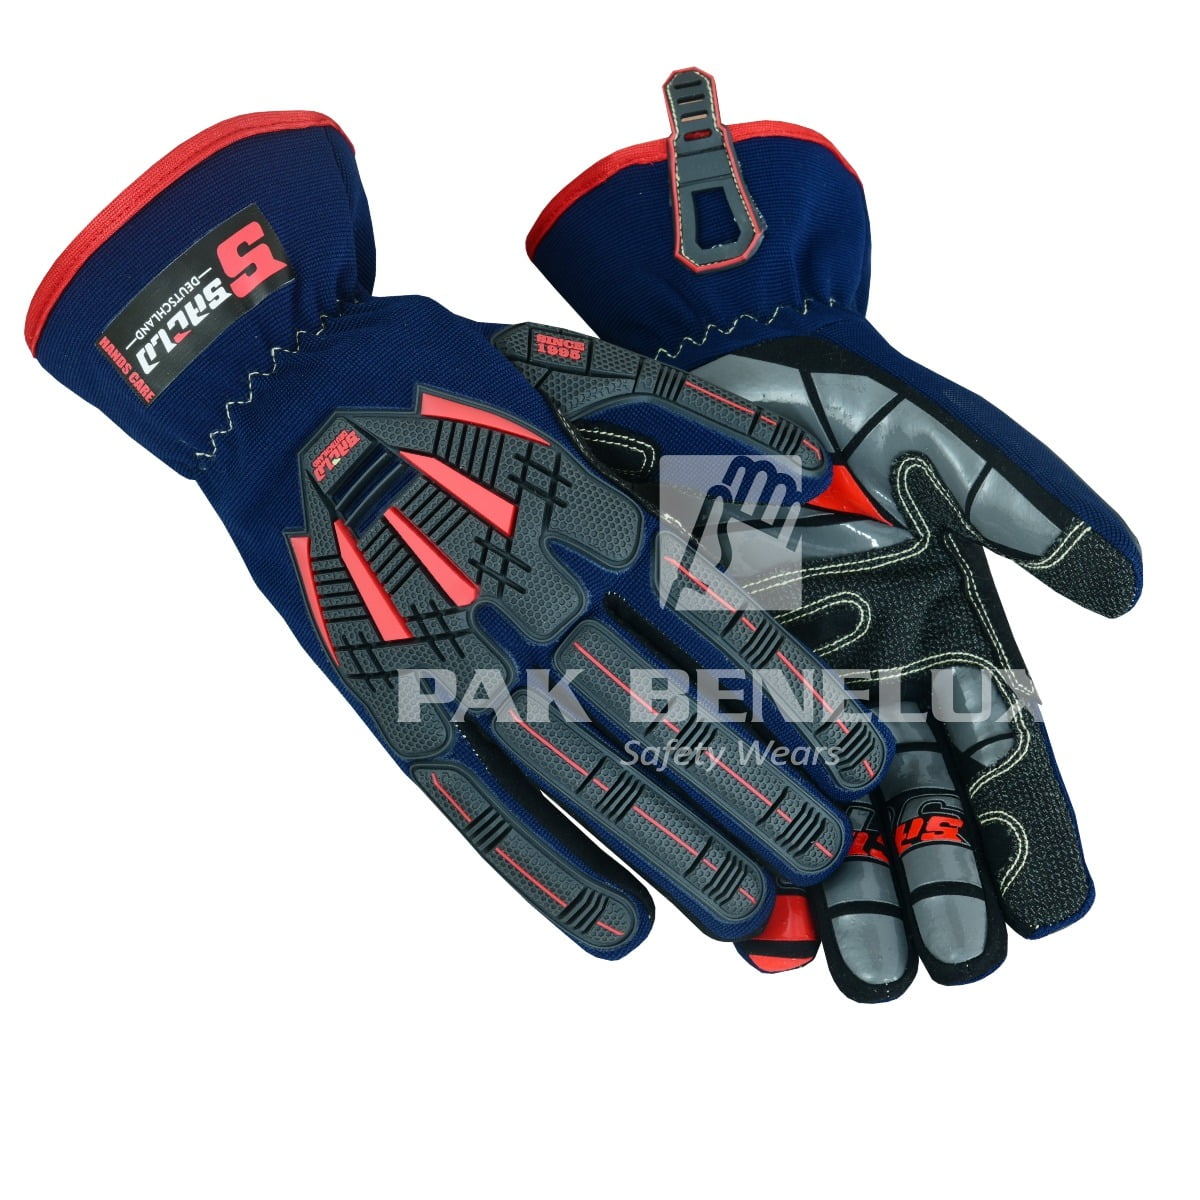 Extrication gloves Manufacturer in Pakistan